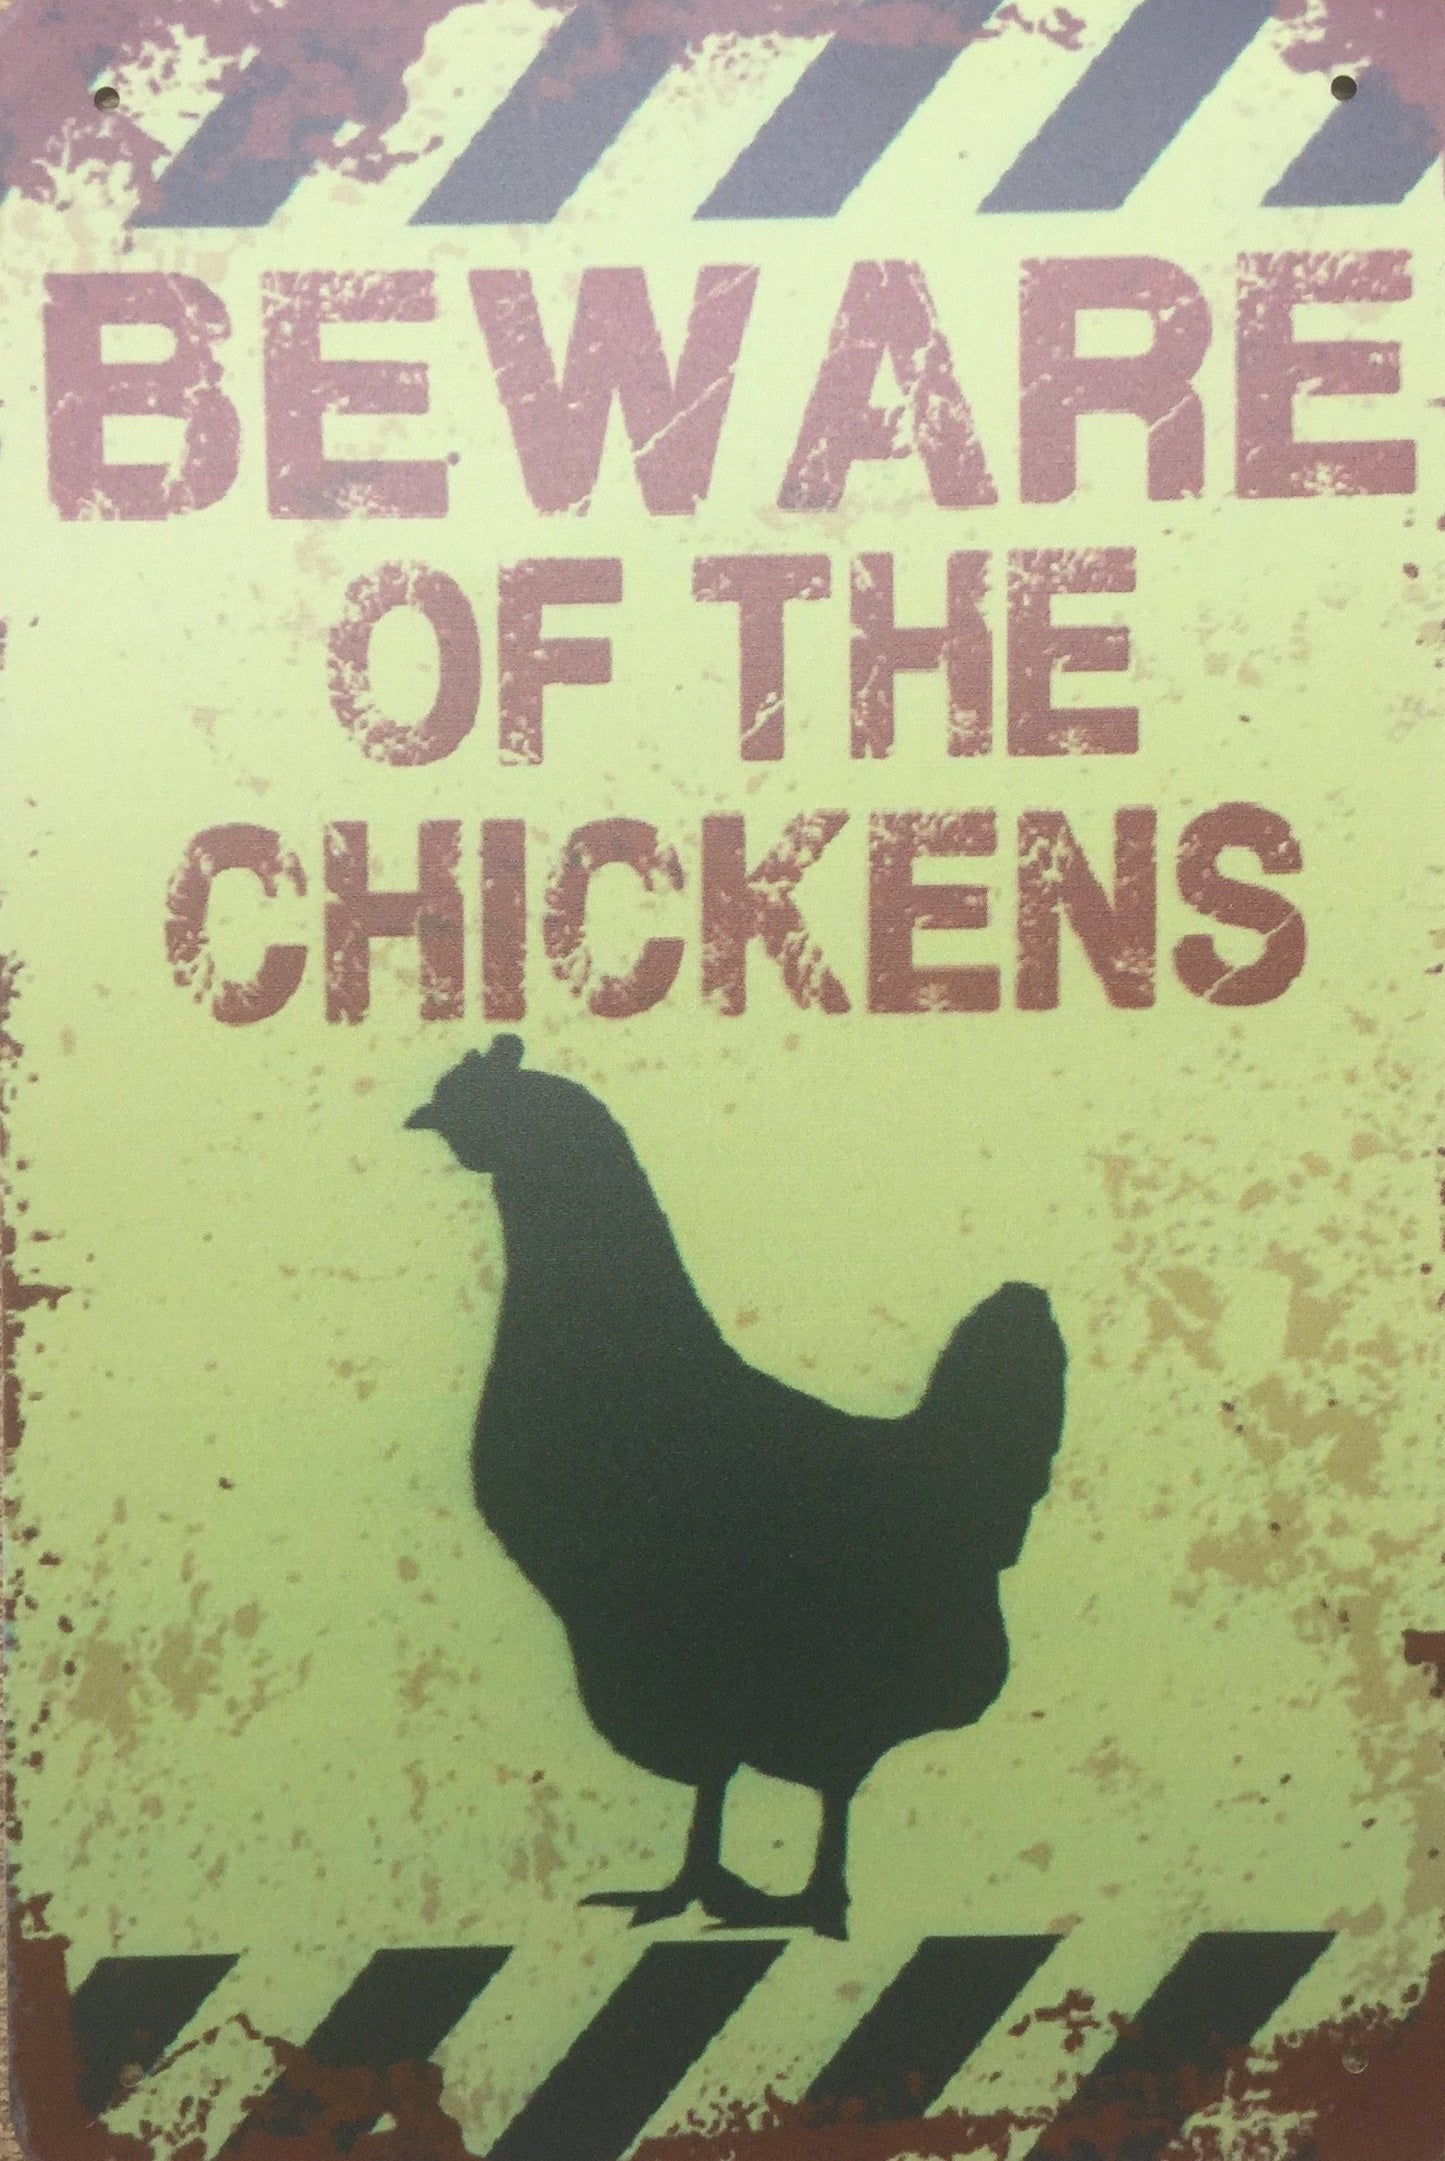 Beware of the chickens